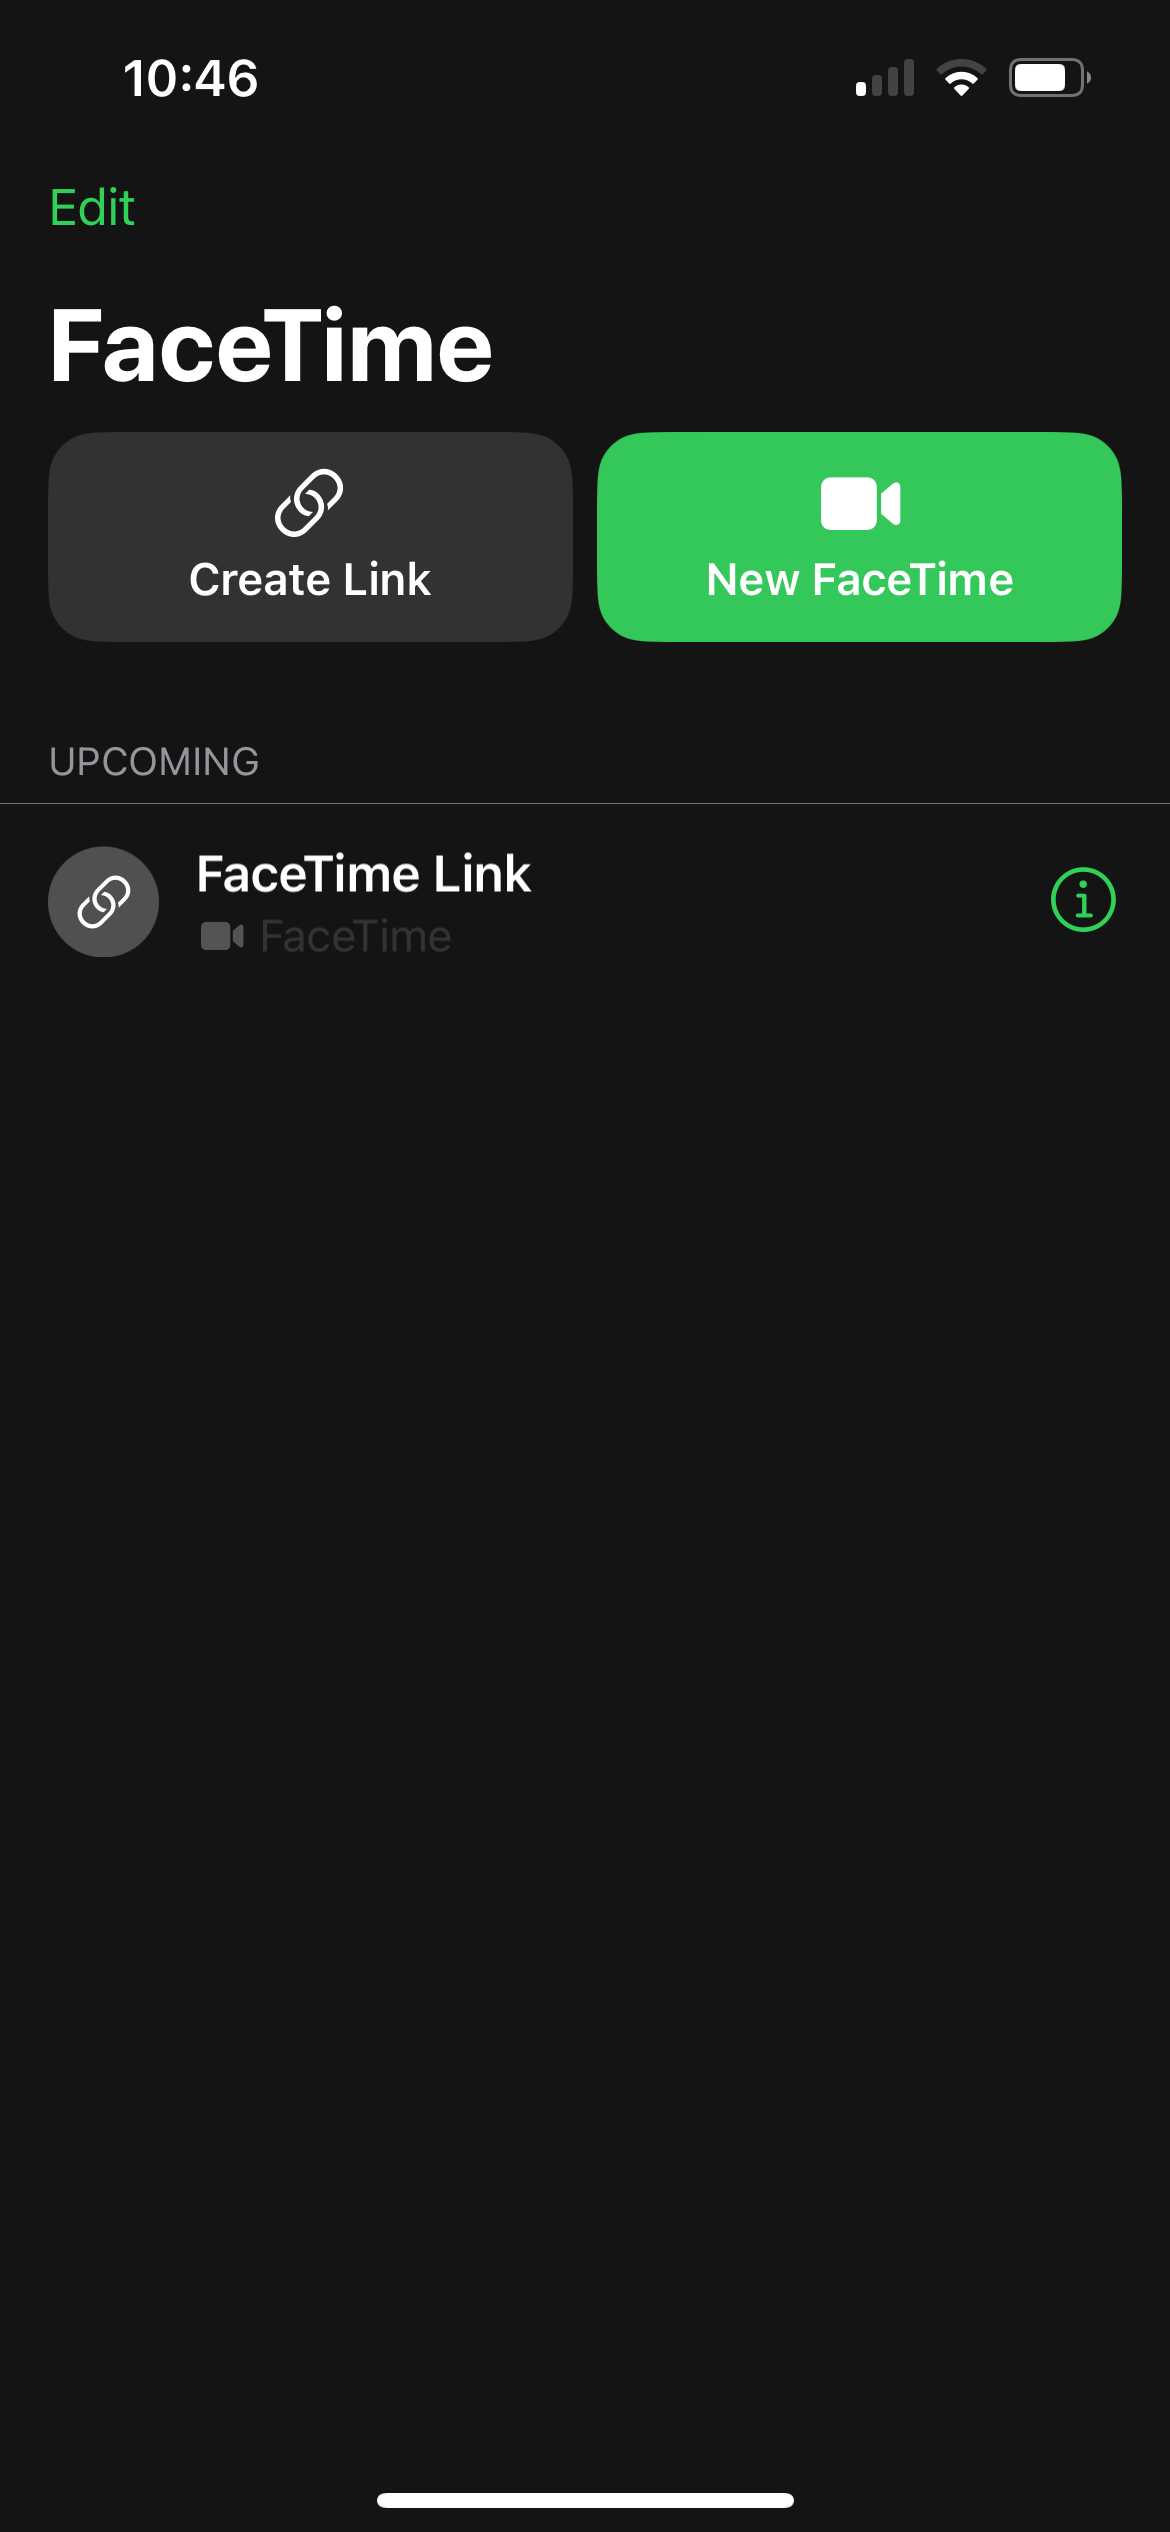 upcoming FaceTime link in iPhone FaceTime app